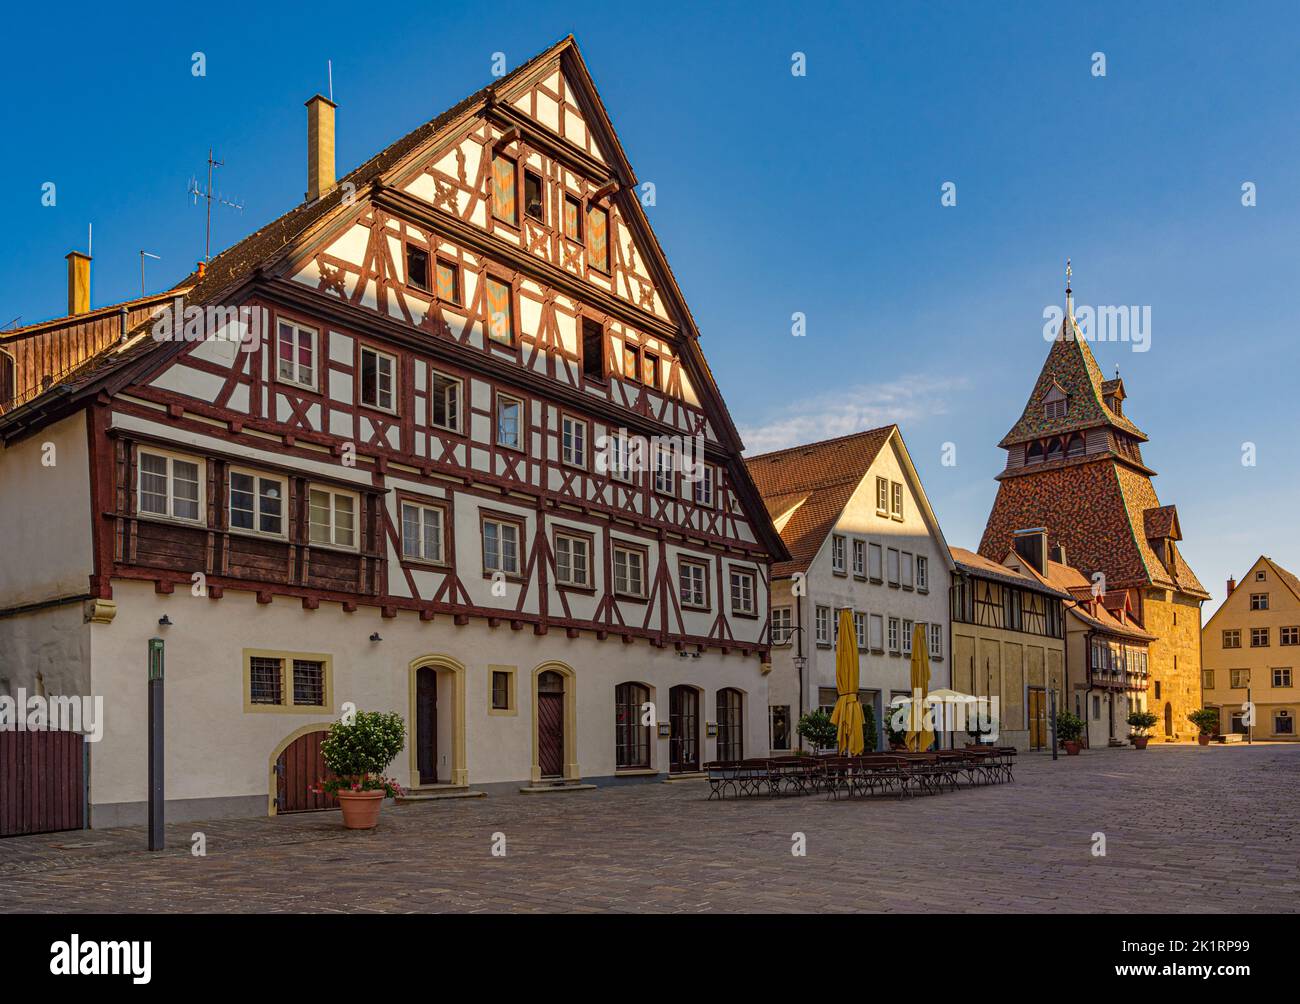 Half-timbered house and bell tower behind the Holy Cross Minster, Schwäbisch Gmünd, Baden-Württemberg, Germany, Europe Stock Photo